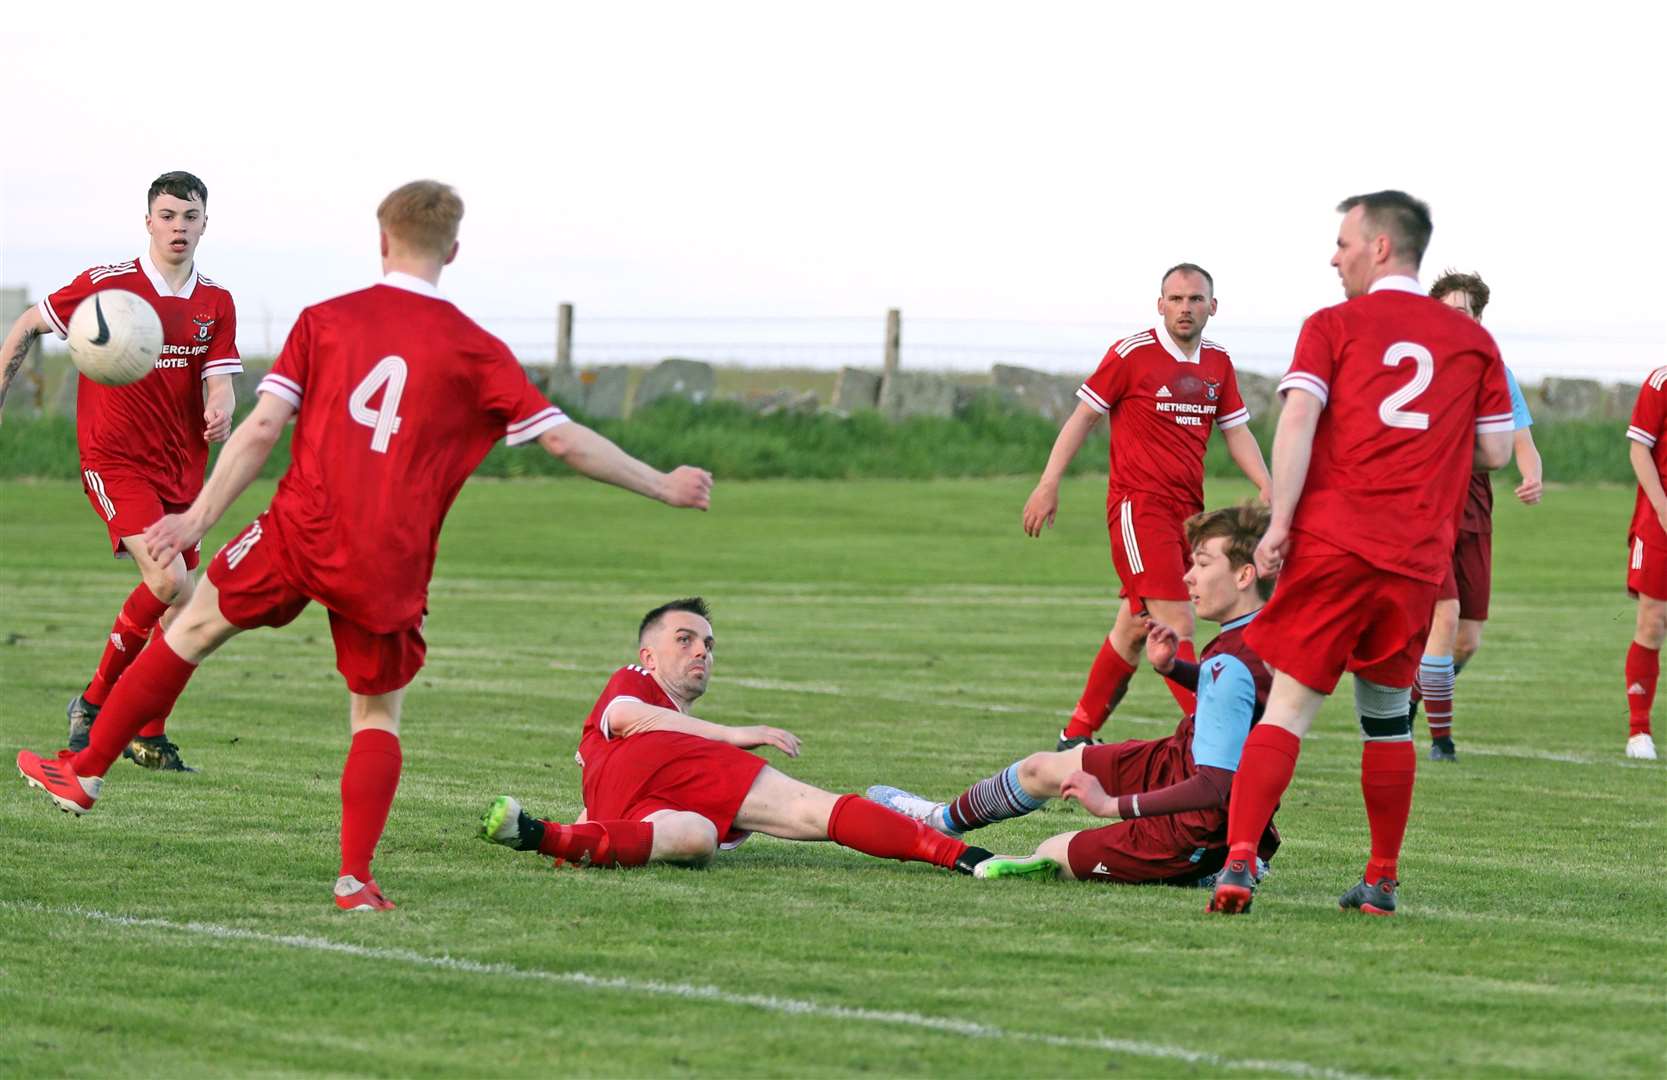 Andrew Brims pulls a goal back for Pentland United despite being surrounded by Wick Groats players. Picture: James Gunn